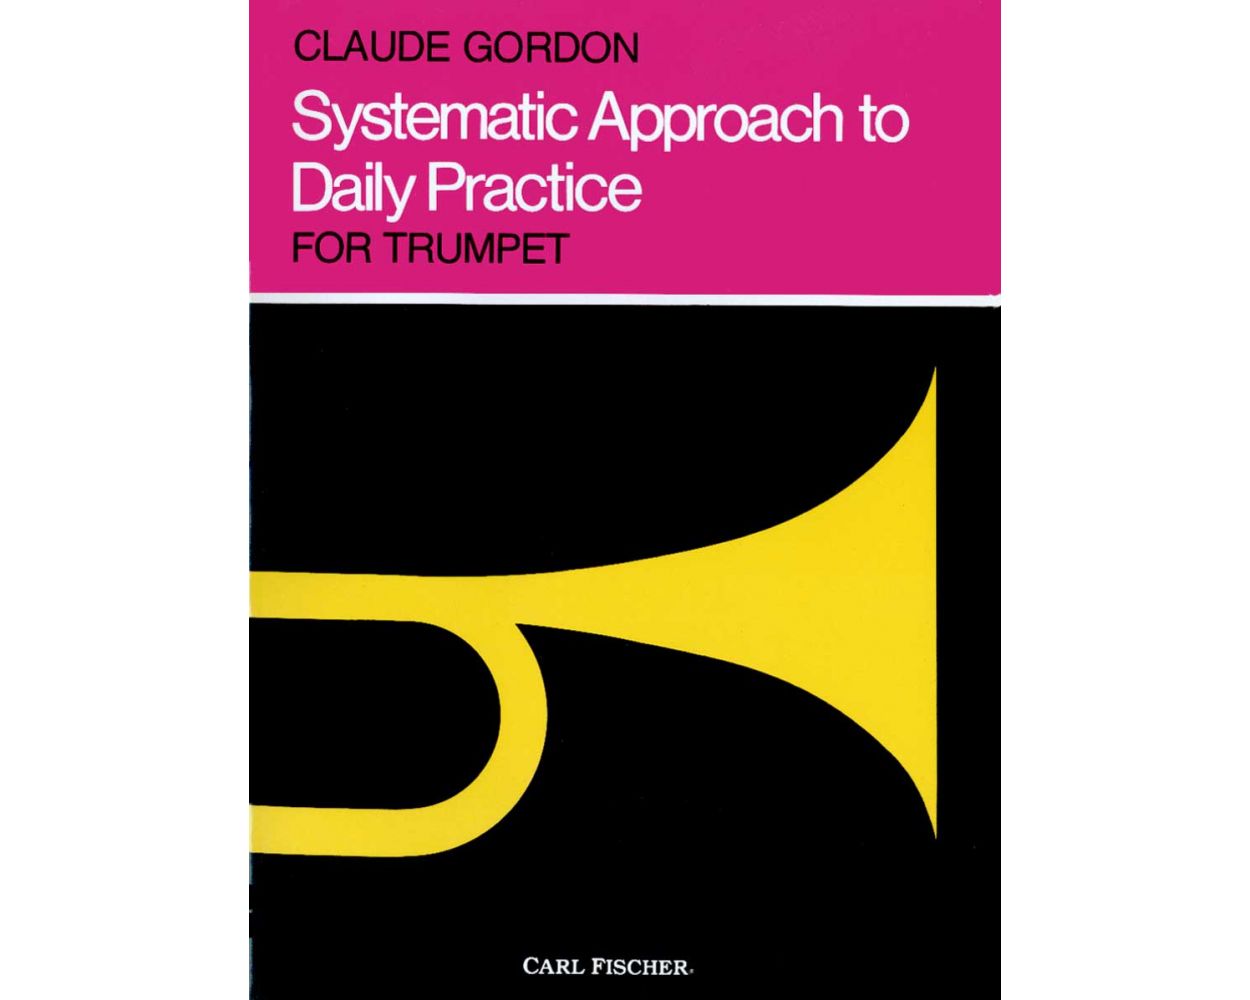 Gordon Systematic Approach to Daily Practice for Trumpet